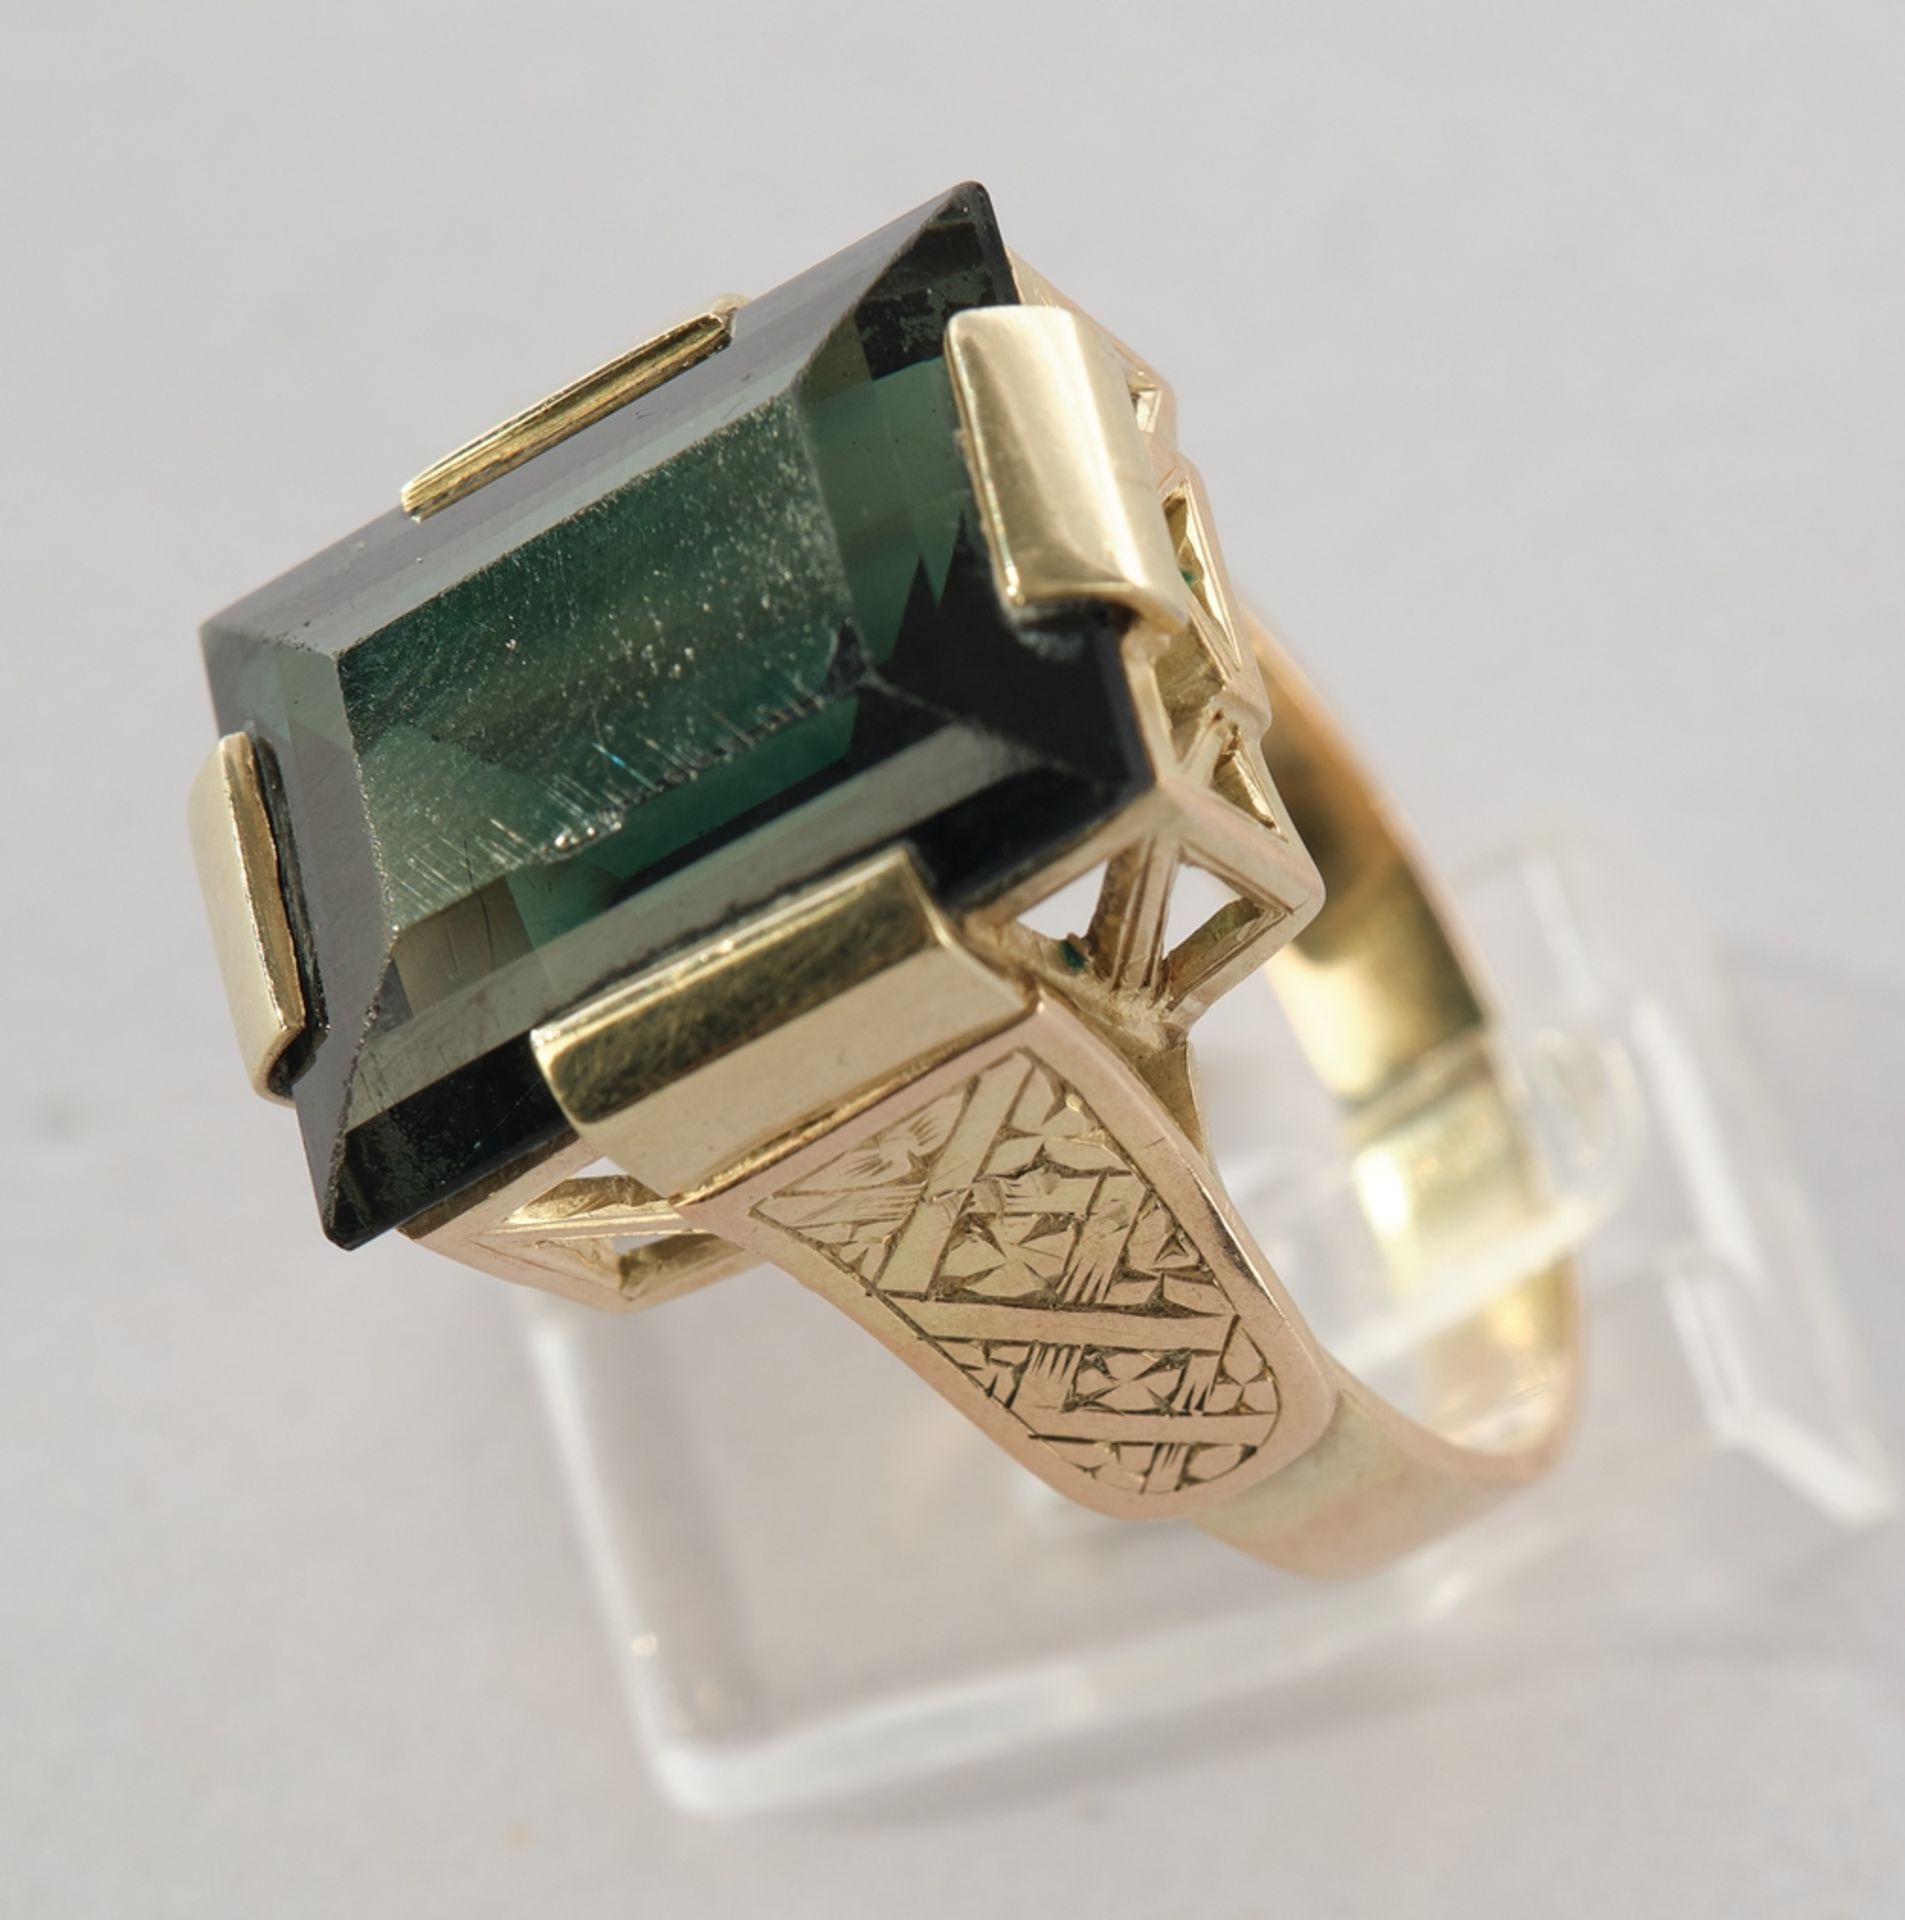 Ring, GG 585, probably tourmaline c. 10.0 ct, 7.85 g, RM 54.5